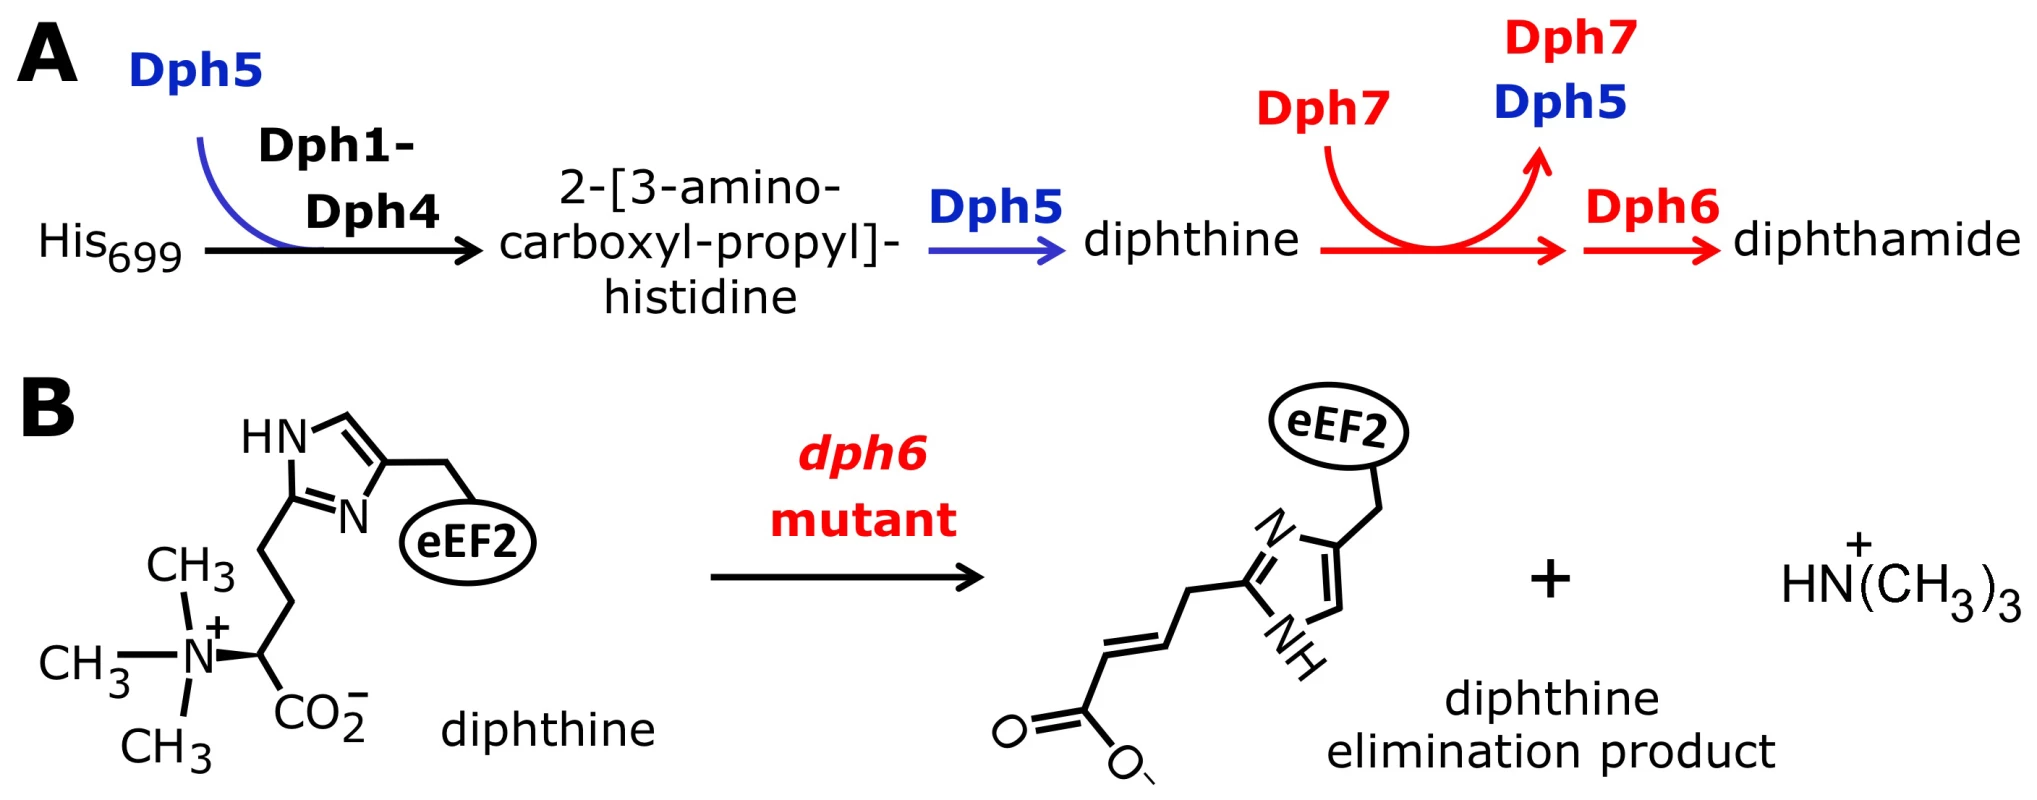 Model for the diphthamide pathway incorporating the proposed novel roles of Dph5, Dph6, and Dph7.